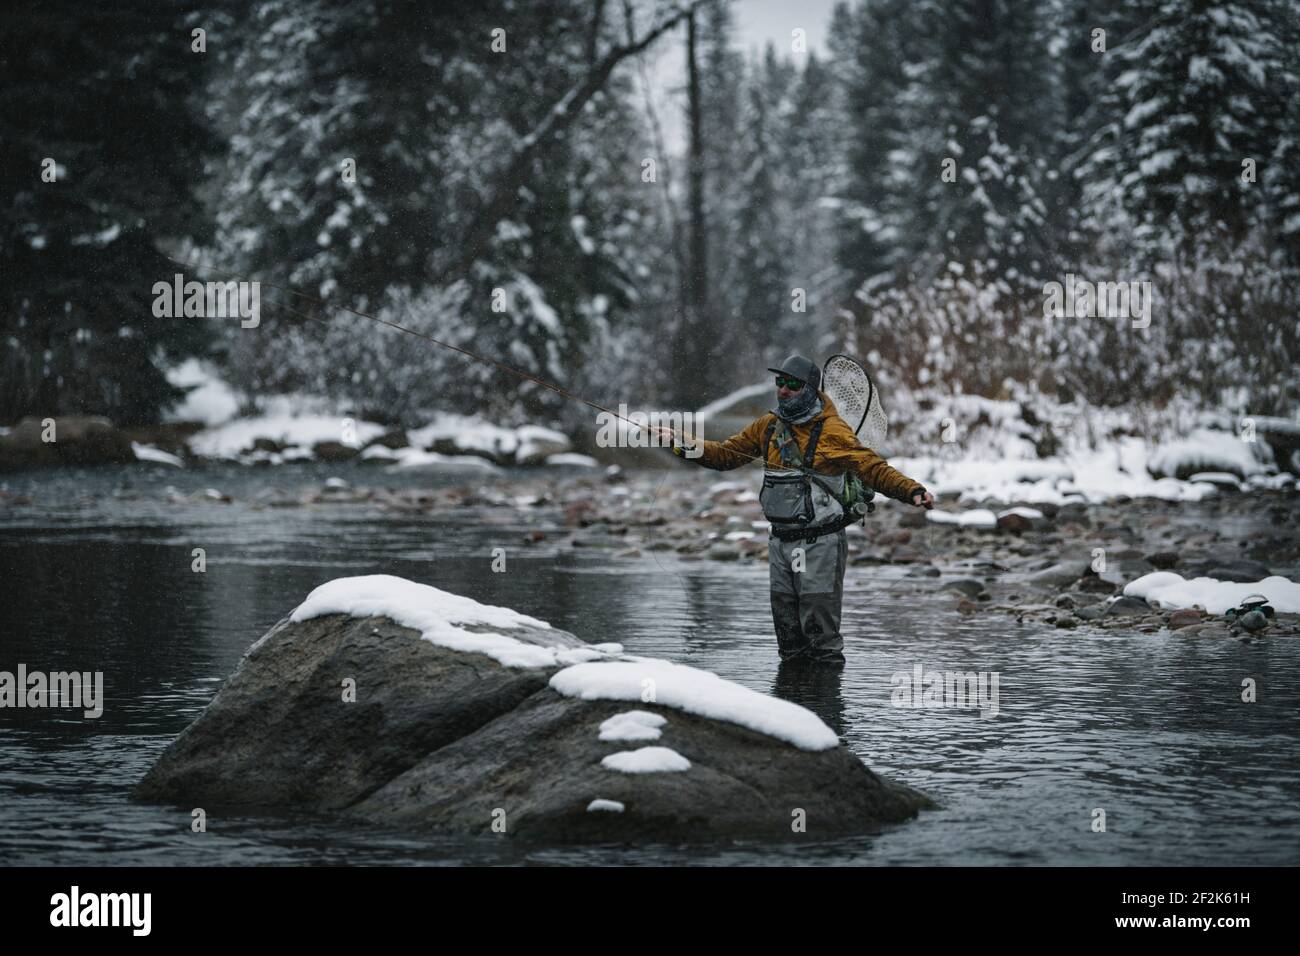 Man fly fishing while standing in river during winter Stock Photo